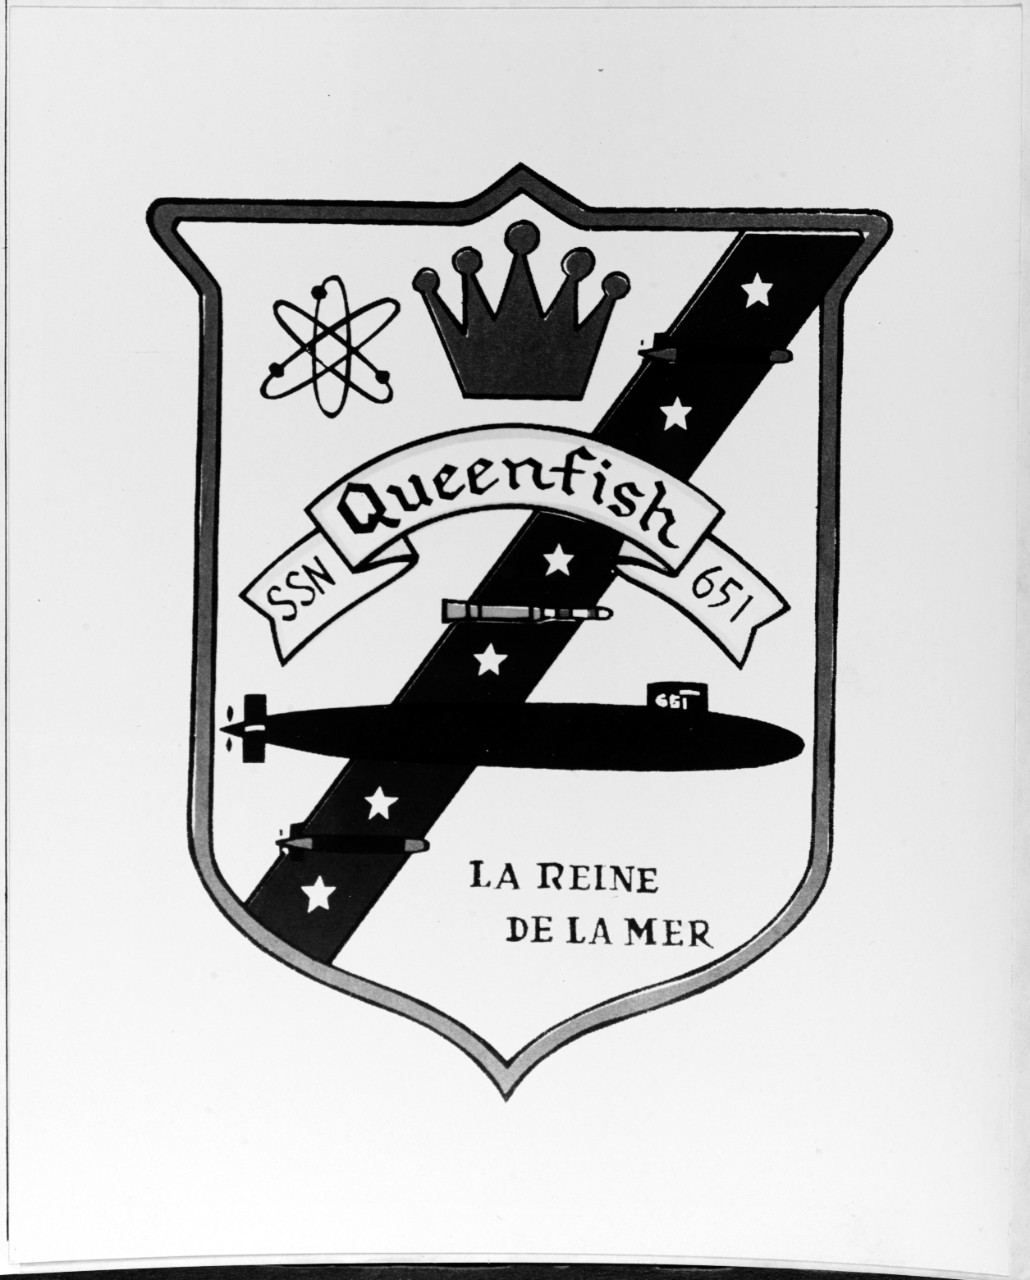 Insignia: USS QUEENFISH (SSN-651)